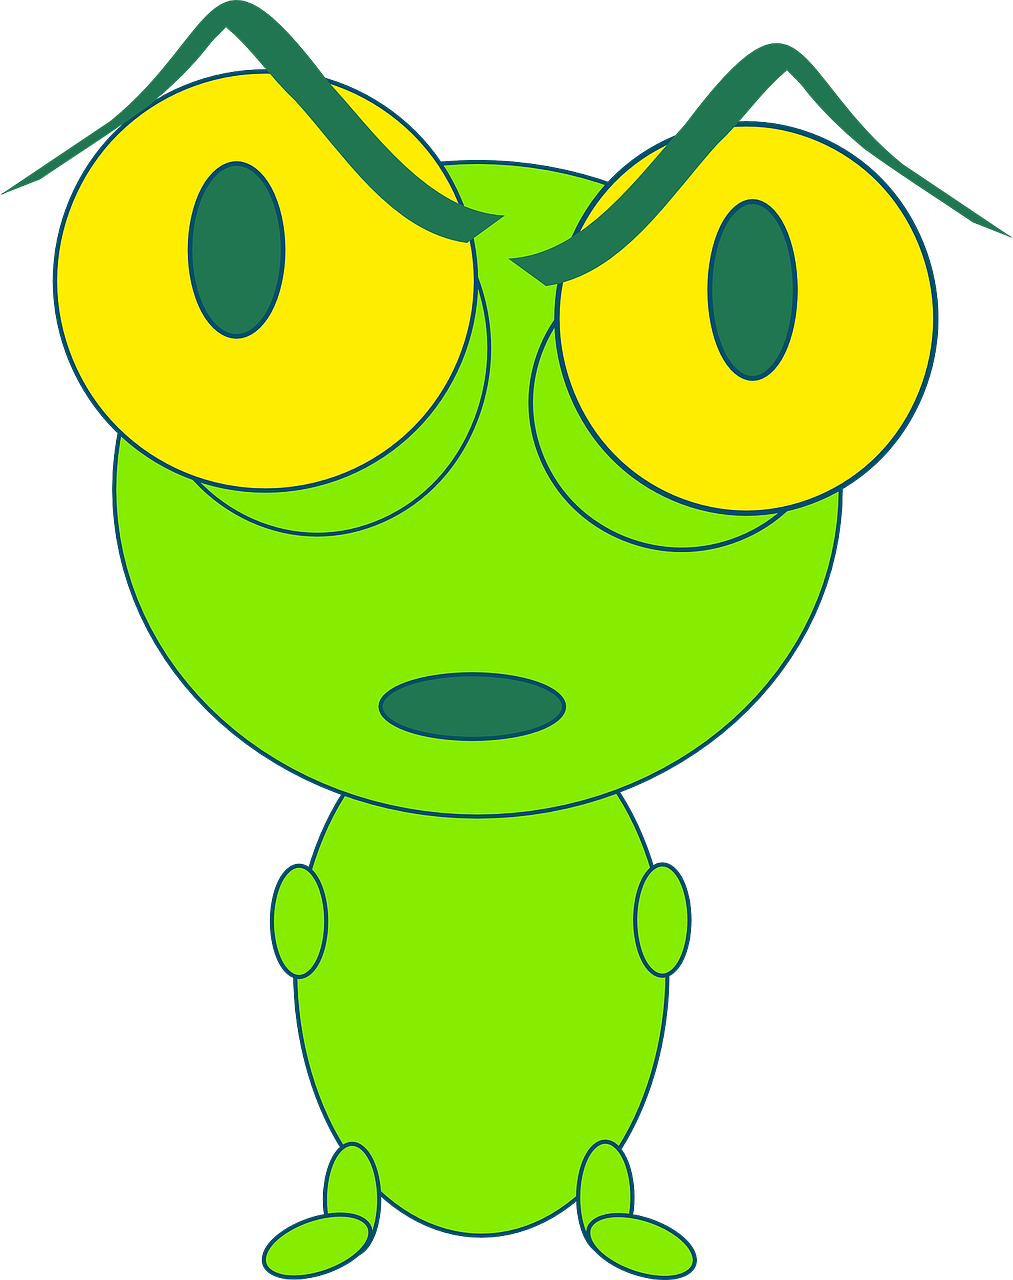 bug,angry,cartoon,insect,cute,big,eyes,green,yellow,bulging,free vector graphics,free pictures, free photos, free images, royalty free, free illustrations, public domain